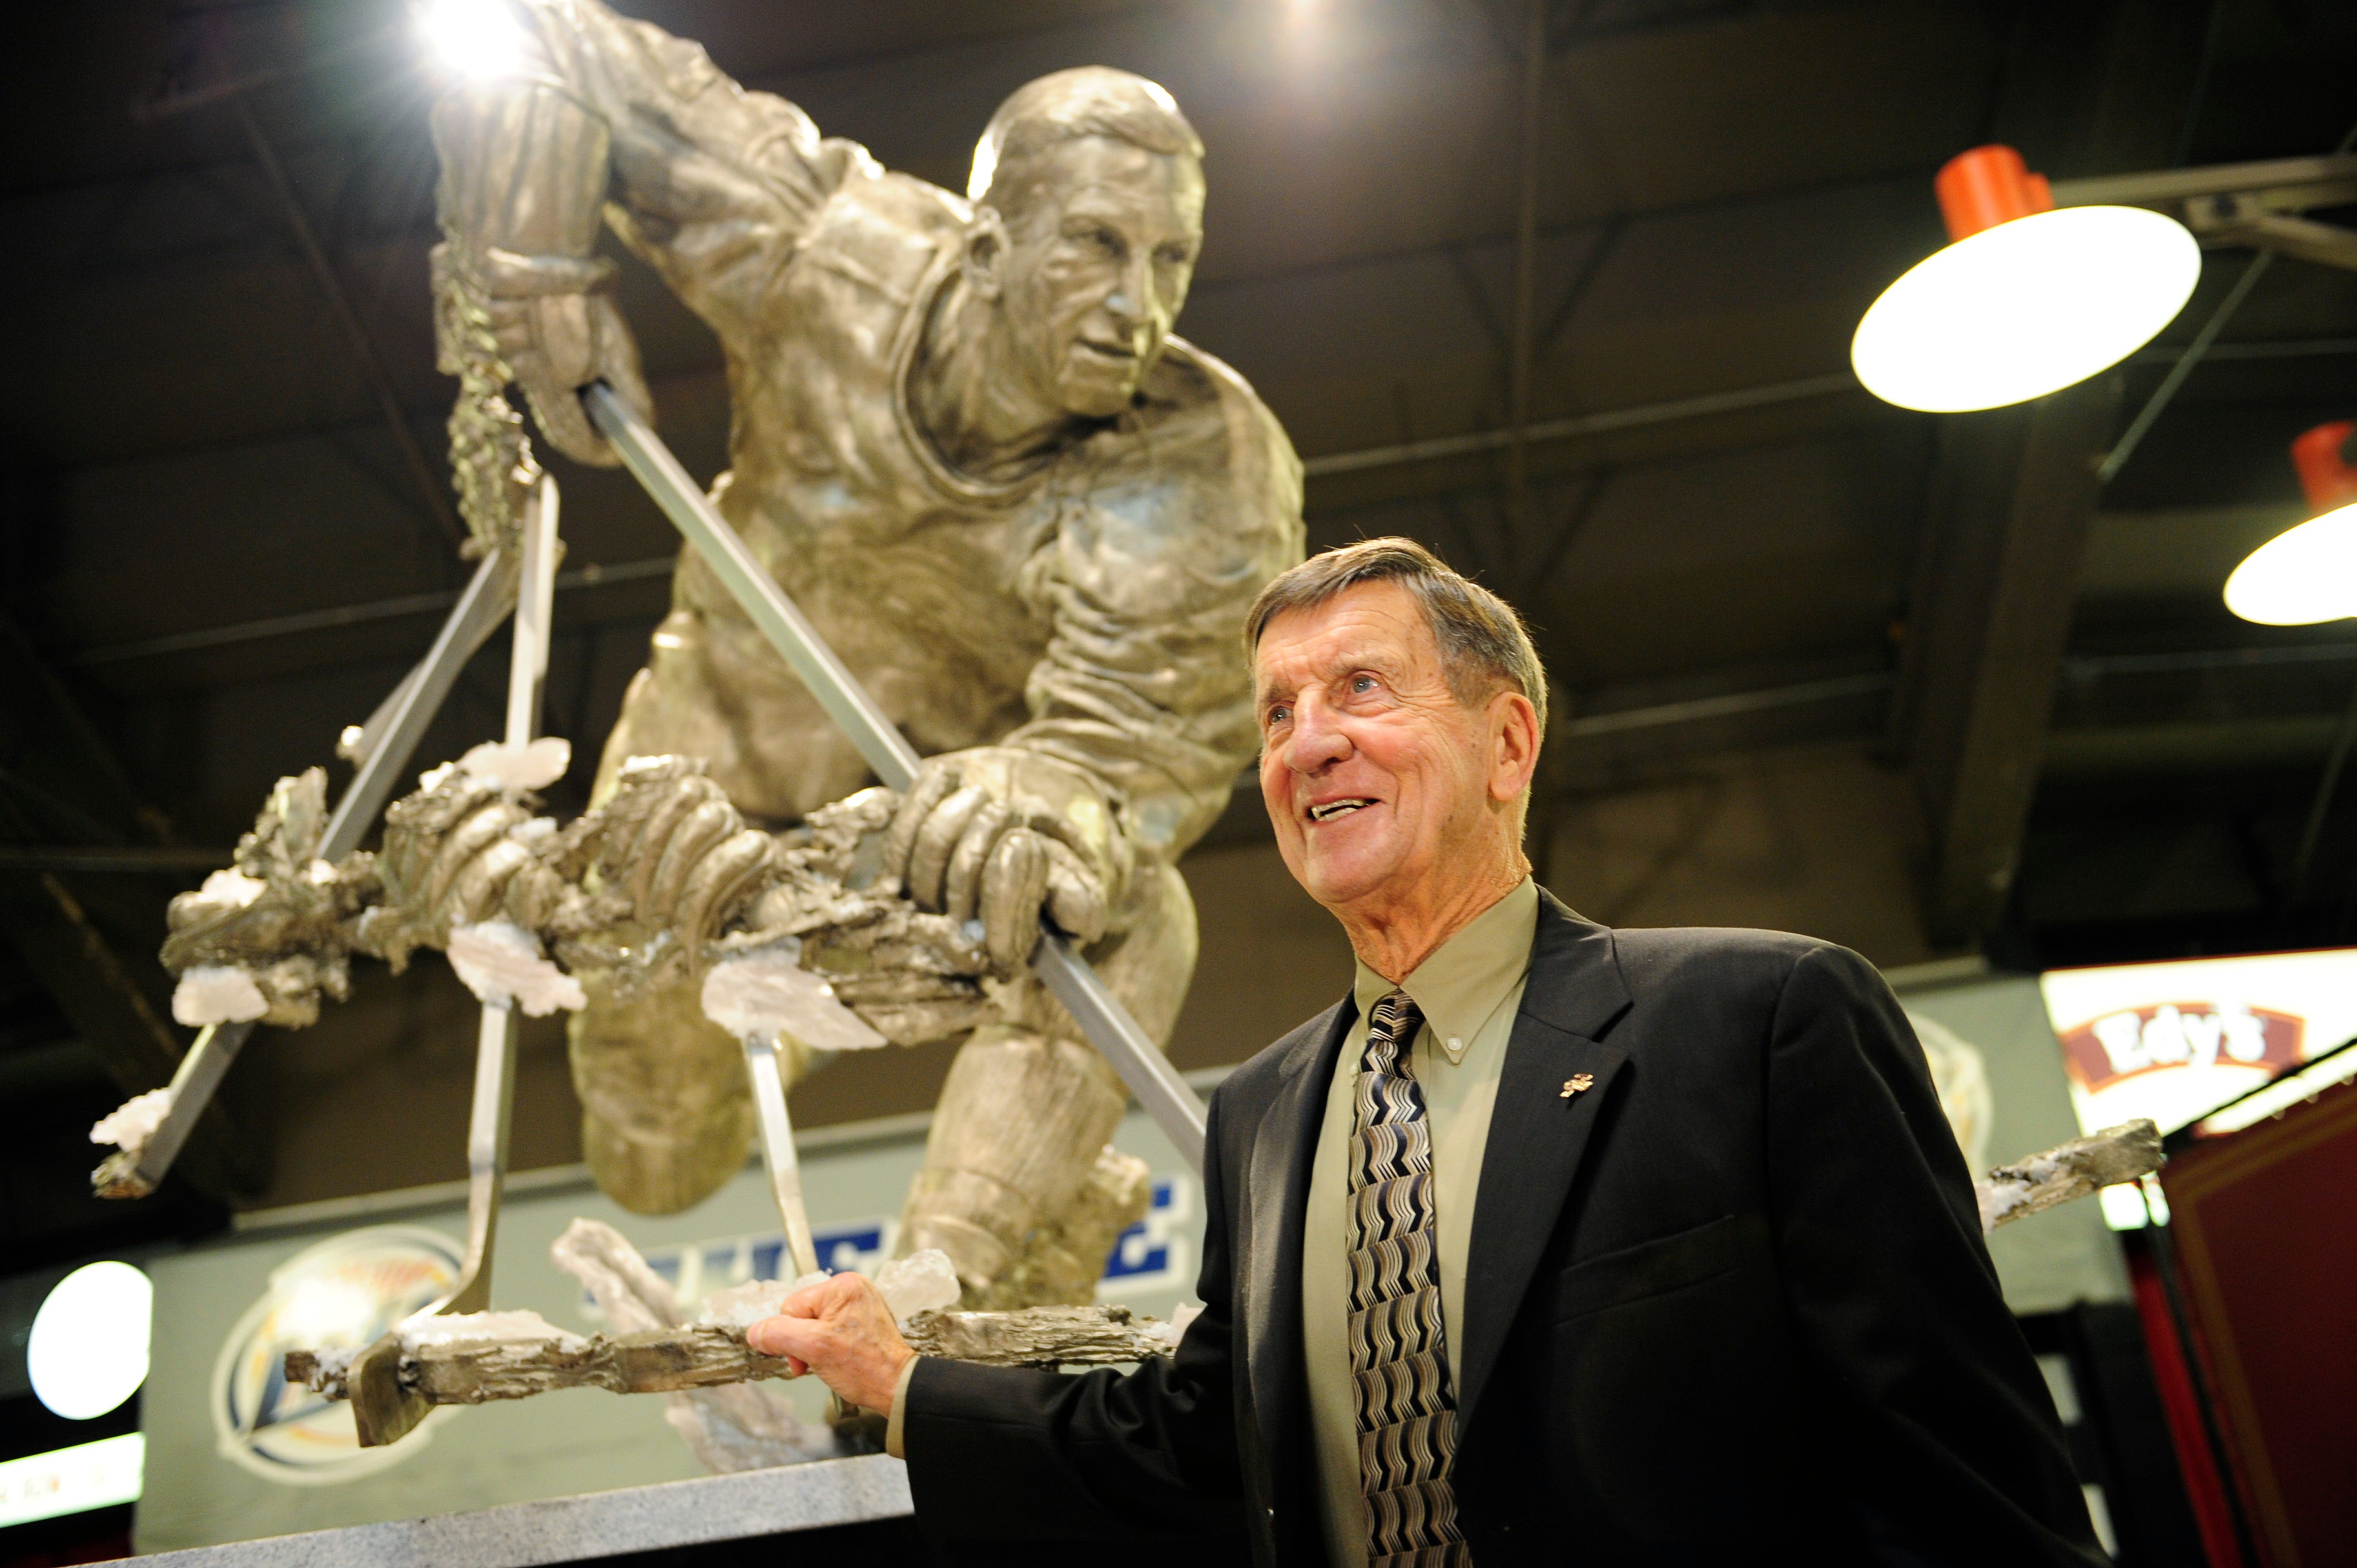 The Ted Lindsay Foundation raised $3 million to help in autism-related causes.